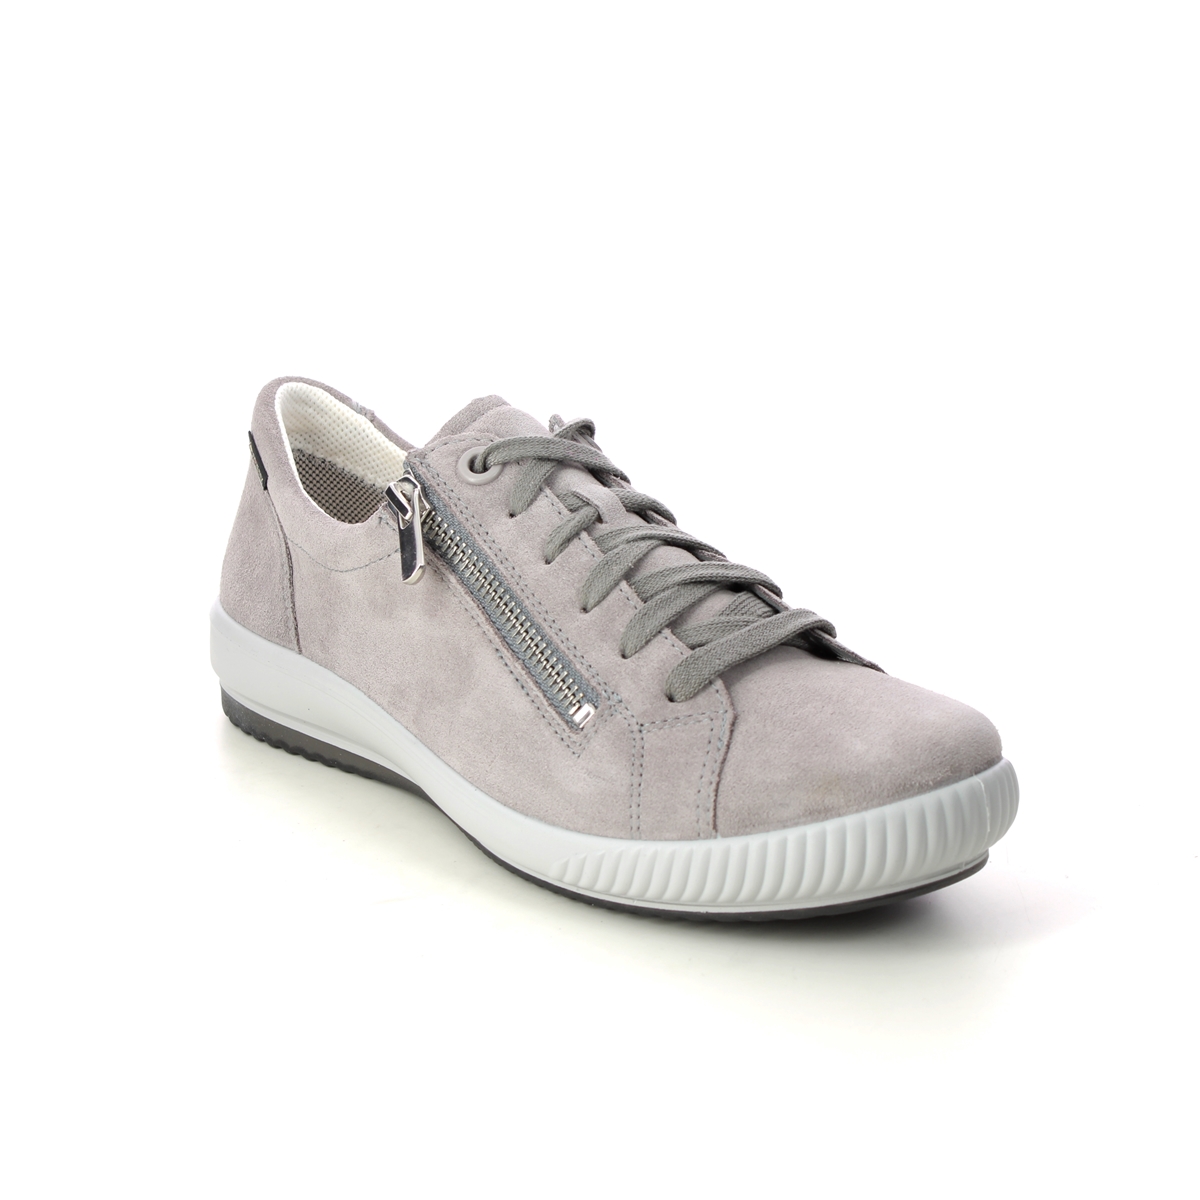 Legero Tanaro 5 Gtx Light Grey Suede Womens Lacing Shoes 2000219-2900 In Size 6 In Plain Light Grey Suede